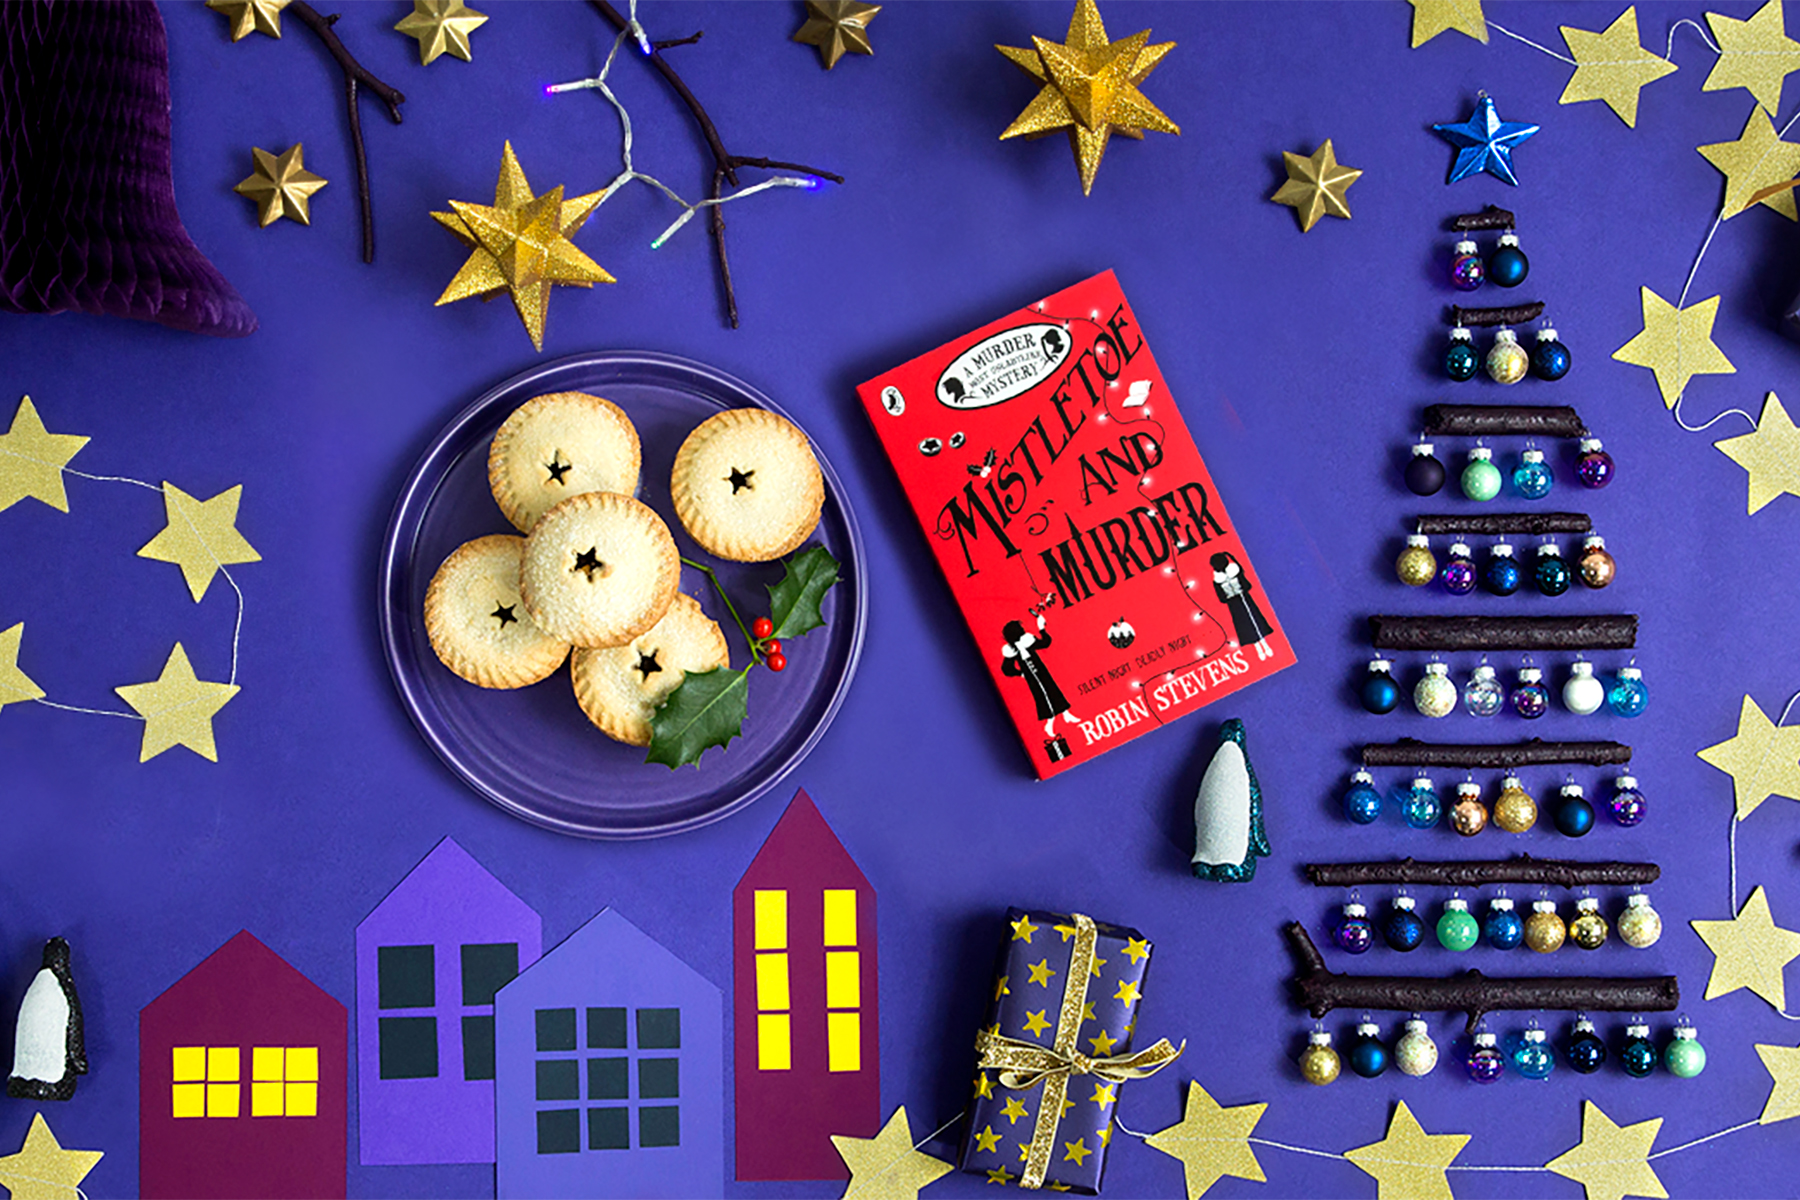 A photo of the book Mistletoe and Murder next to some mince pies on a purple background surrounded by Christmas decorations